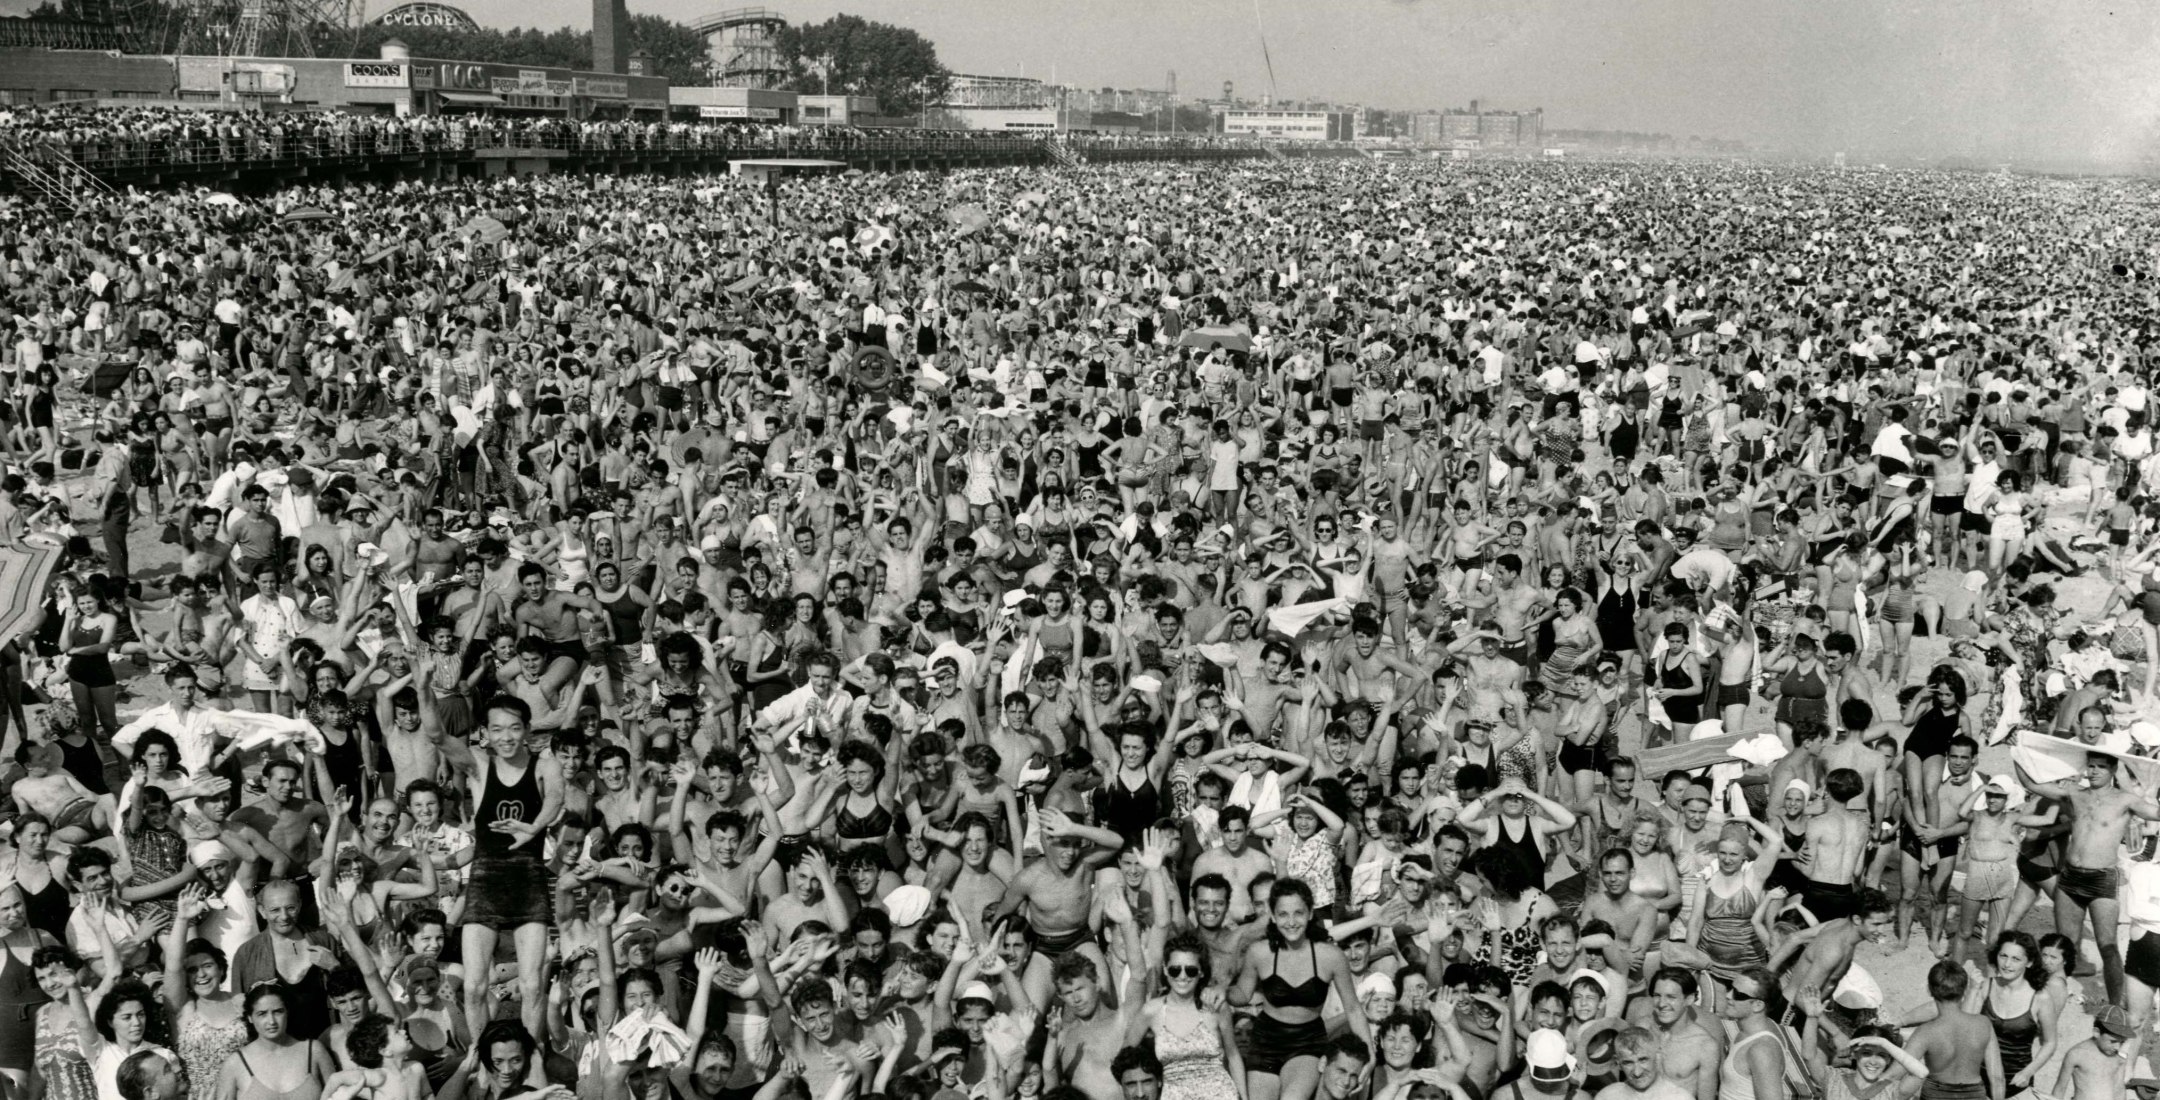 Weegee&mdash;Exposure  | Black and white phtograph of a crowd at Coney Island&mdash;faciing camera&mdash;1946.